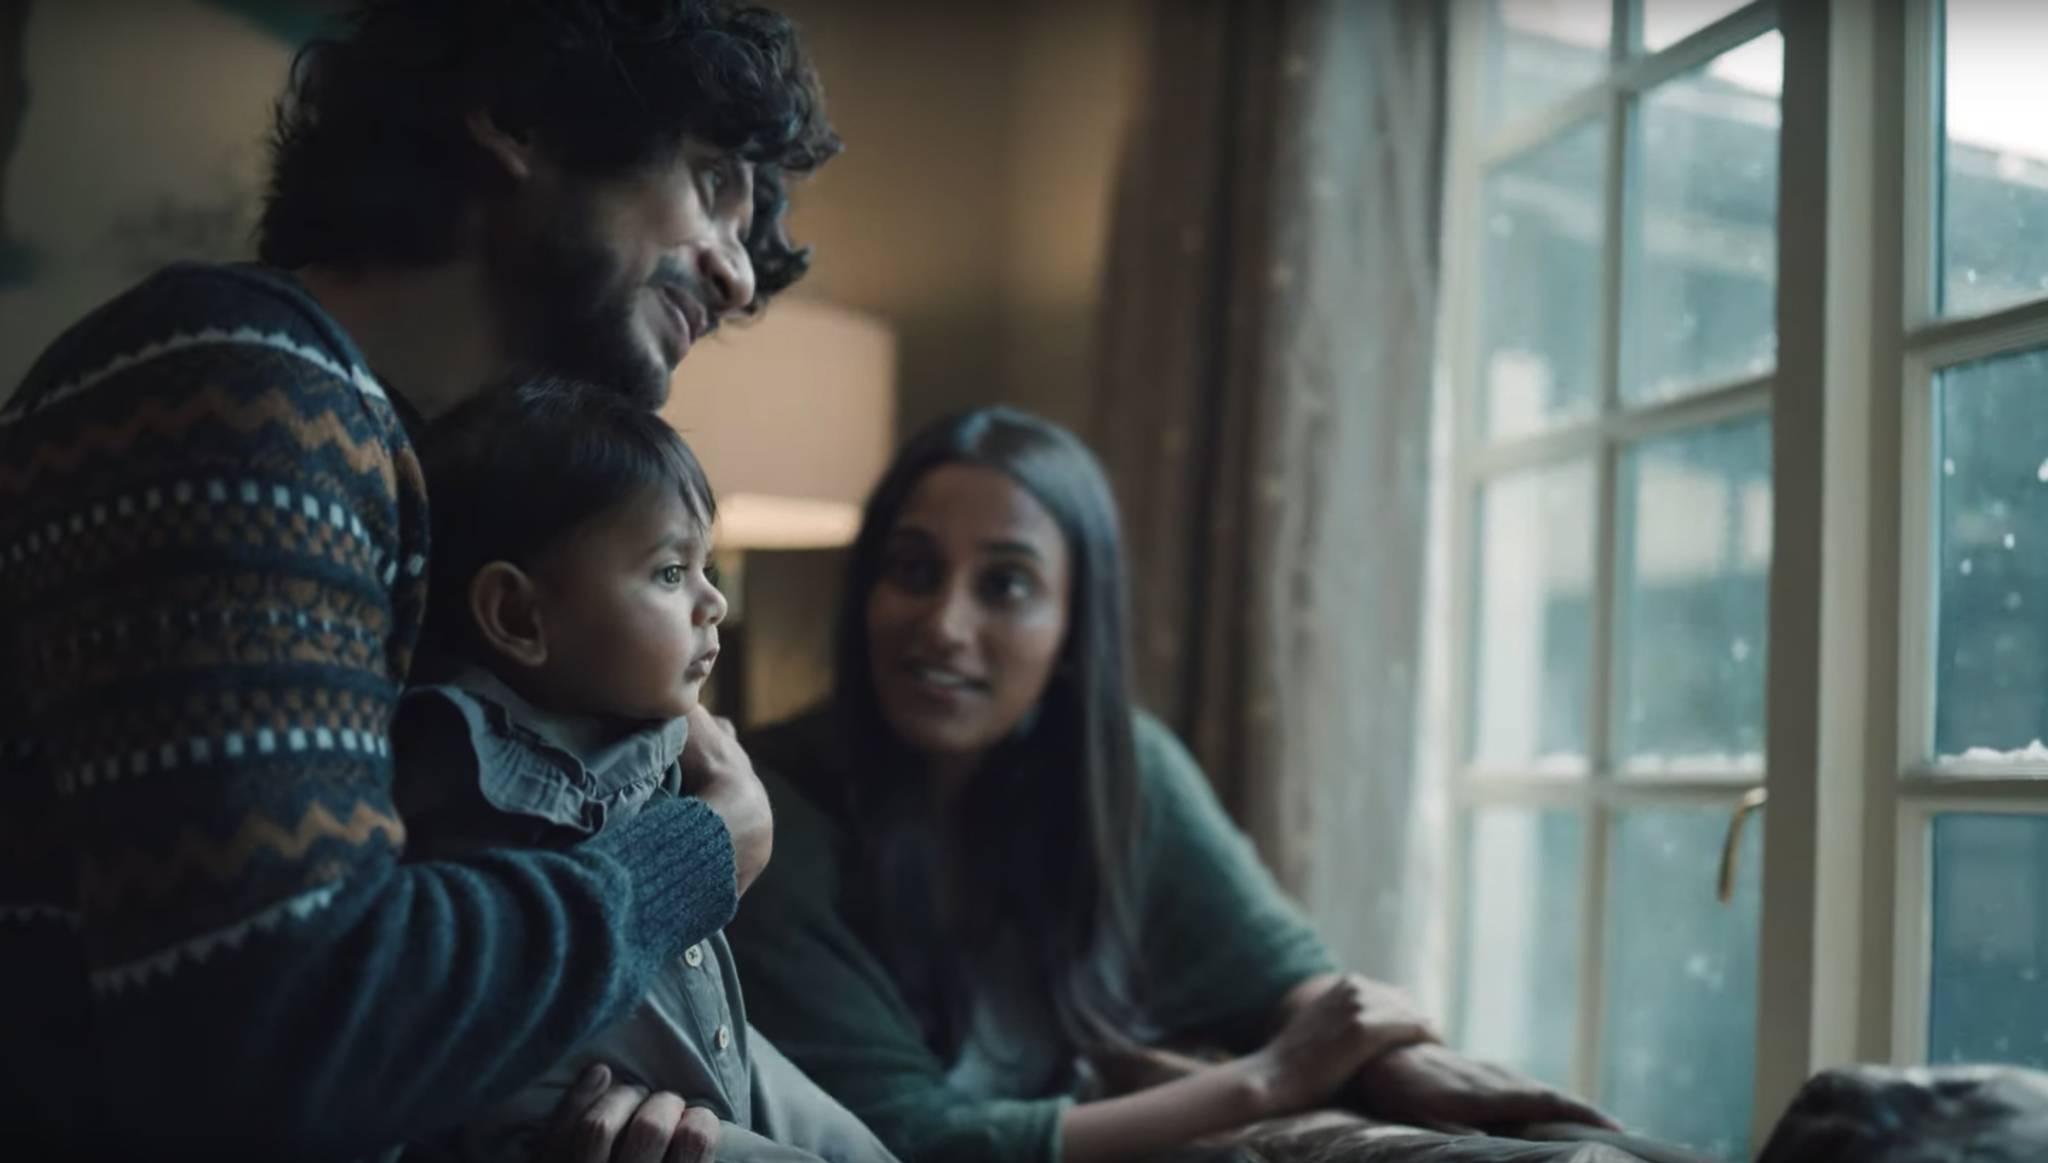 Pampers ad depicts real-life experience of parenthood